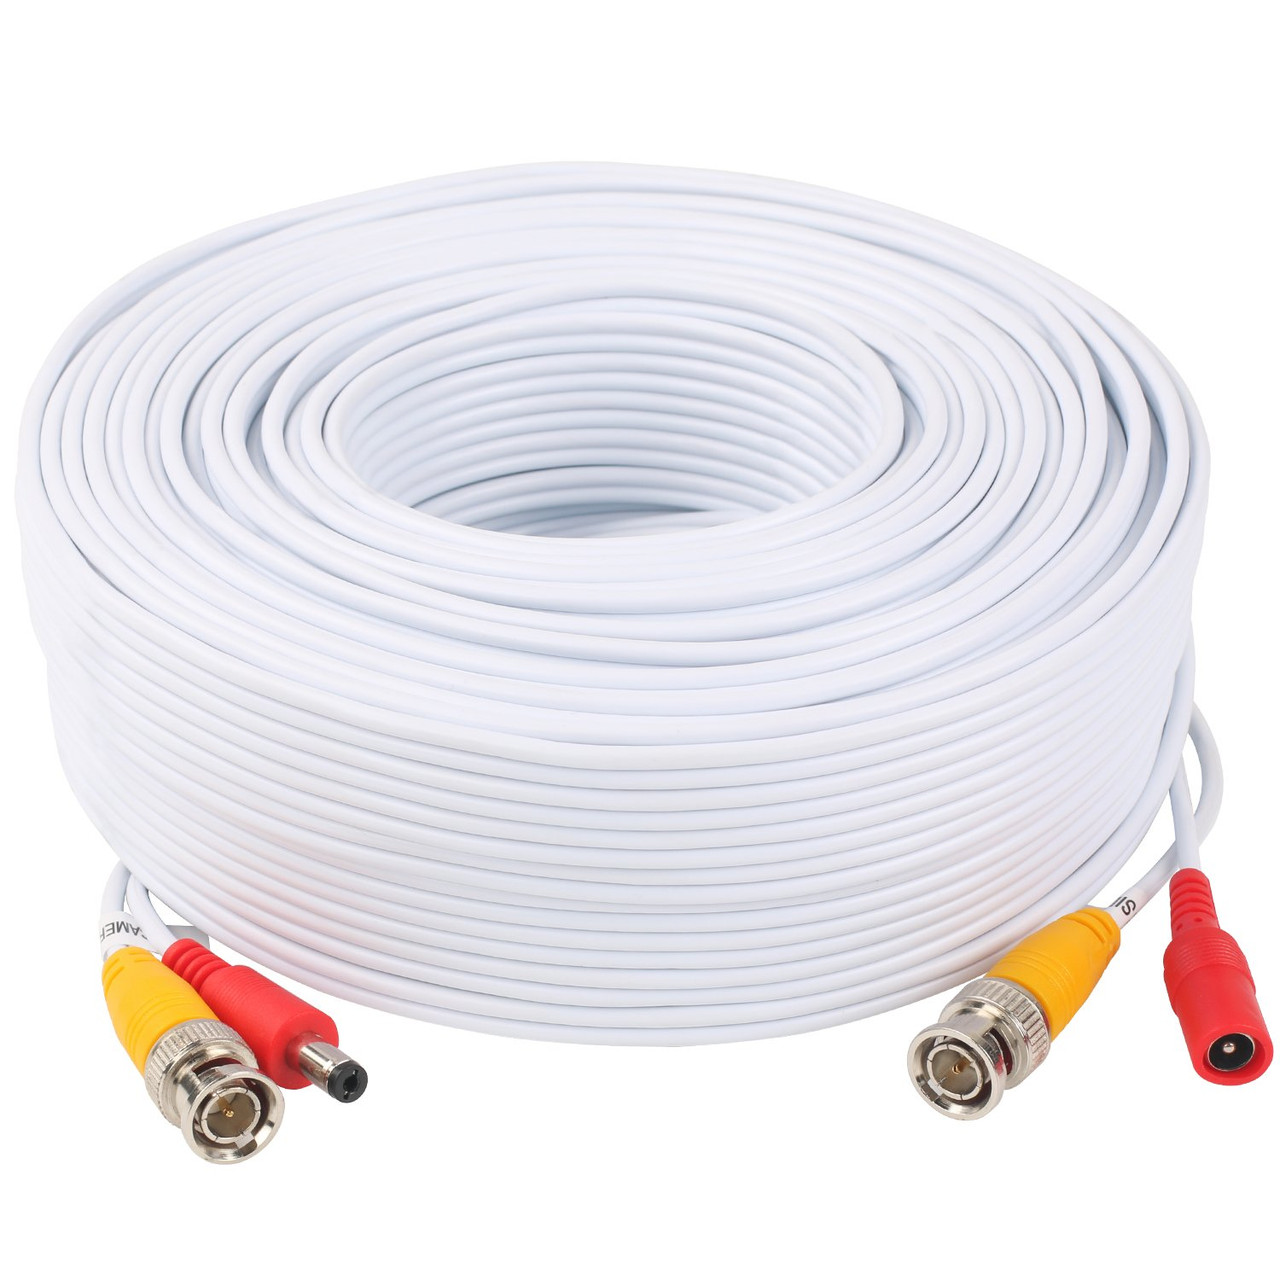 Postta 200Feet (61m ) All-in-One CCTV Video (BNC) + Power Cables , White - 4 Pack Kit - *Pre-Order